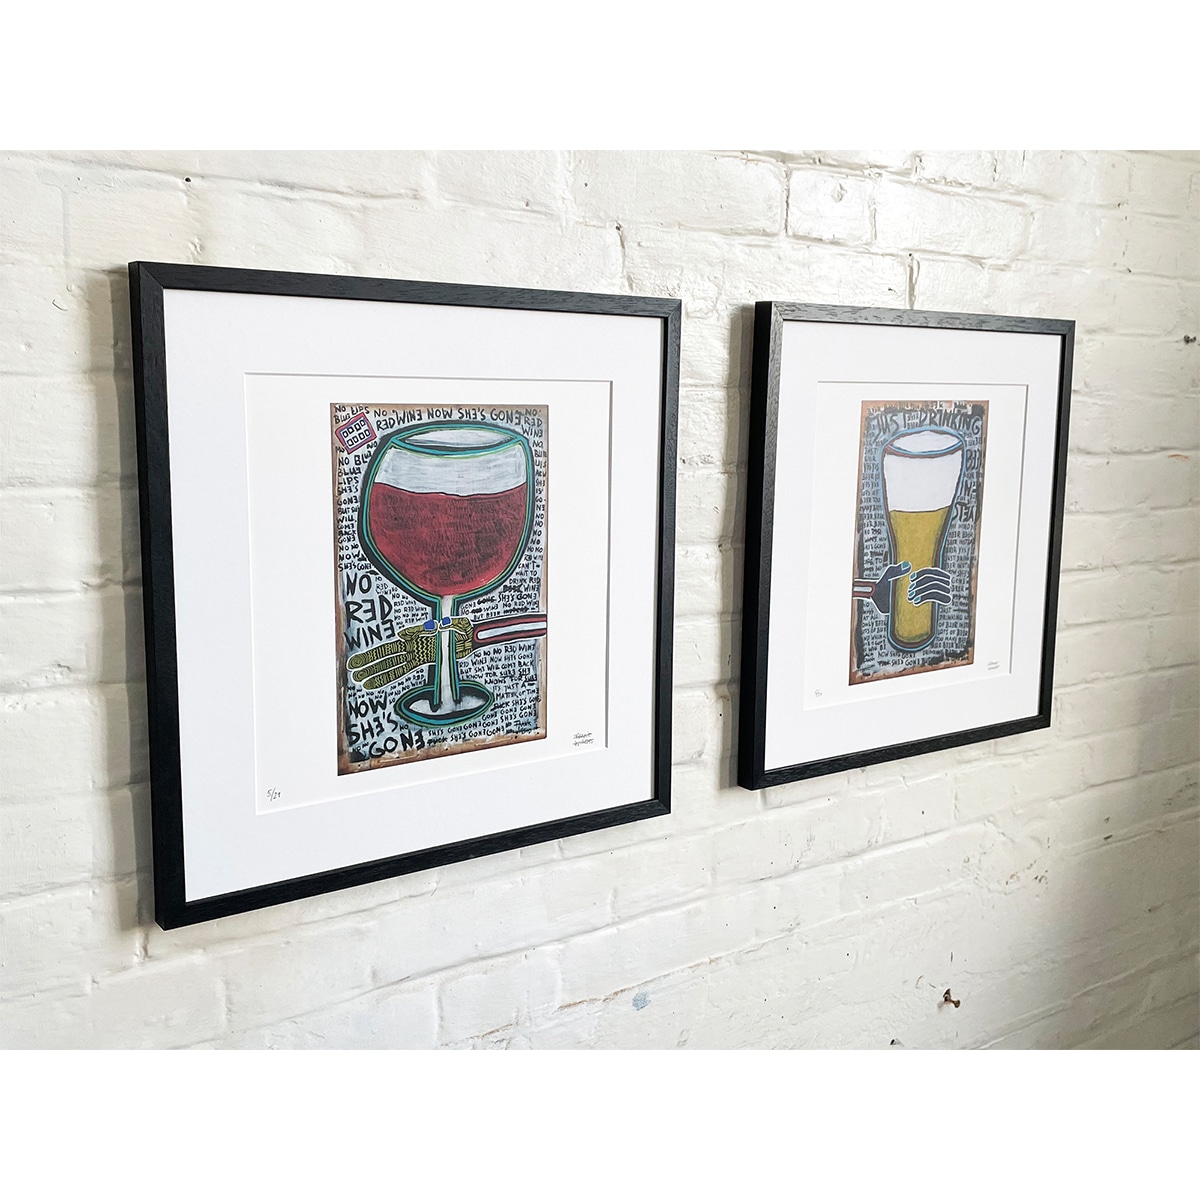 Limited Edt. Art Print – NO RED WINE NOW SHE’S GONE + JUST DRINKING BEER INSTEAD (SET)